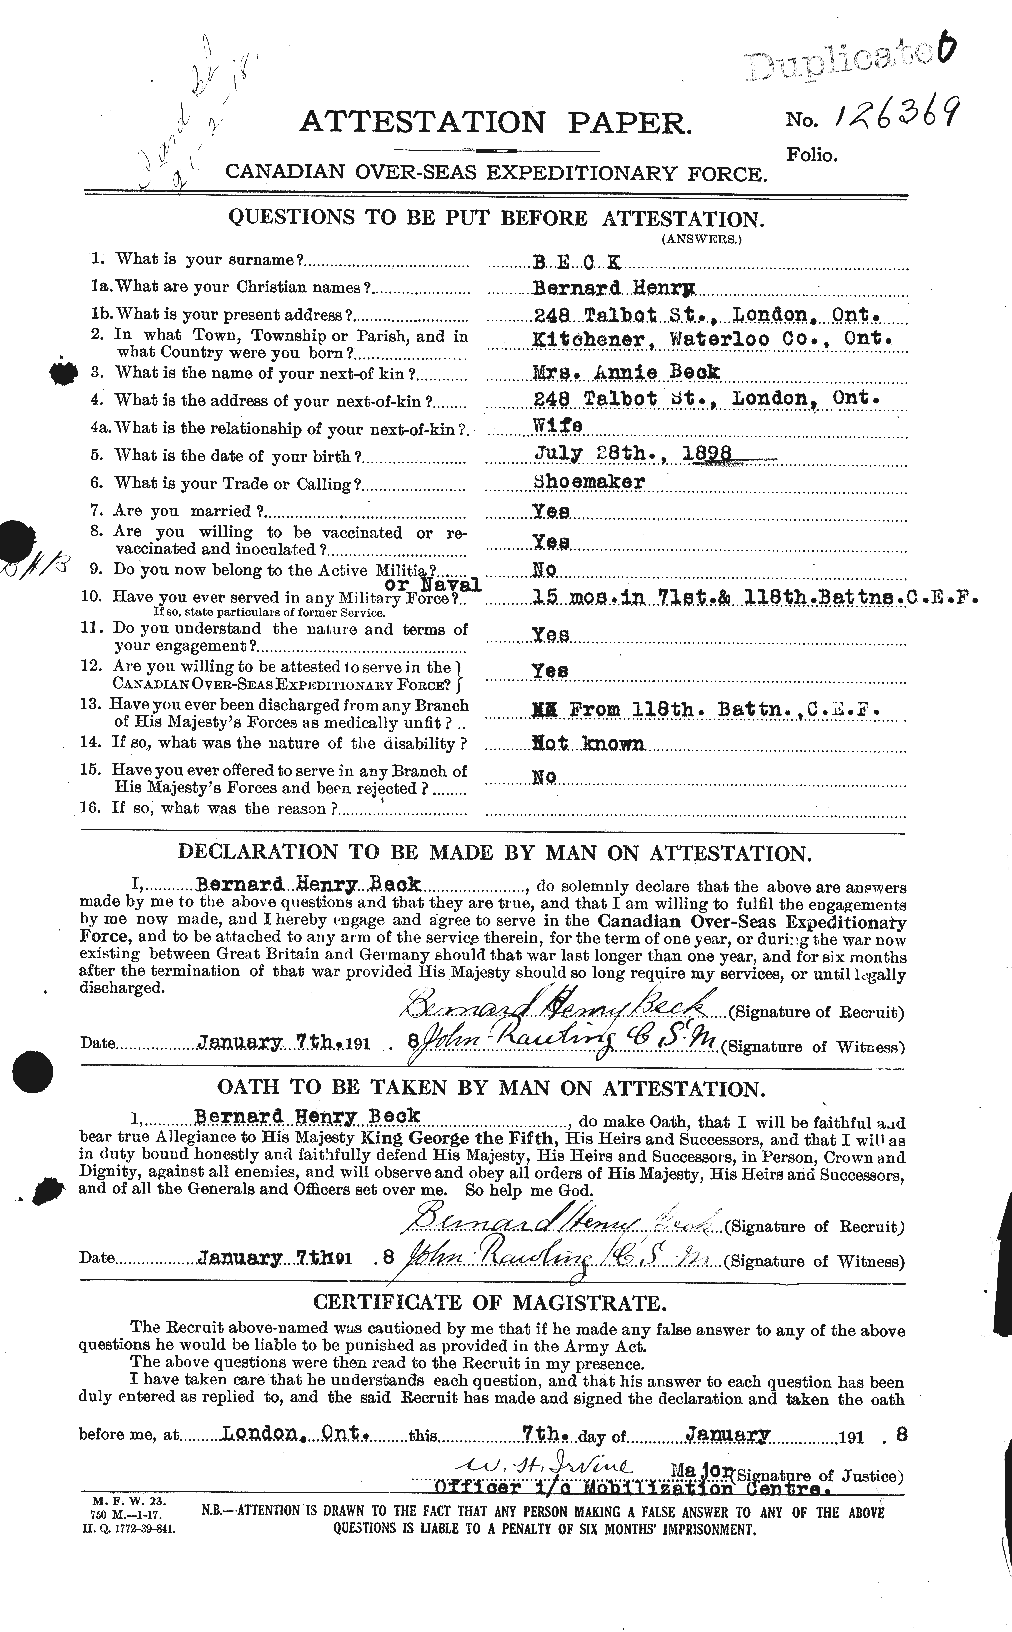 Personnel Records of the First World War - CEF 232086a